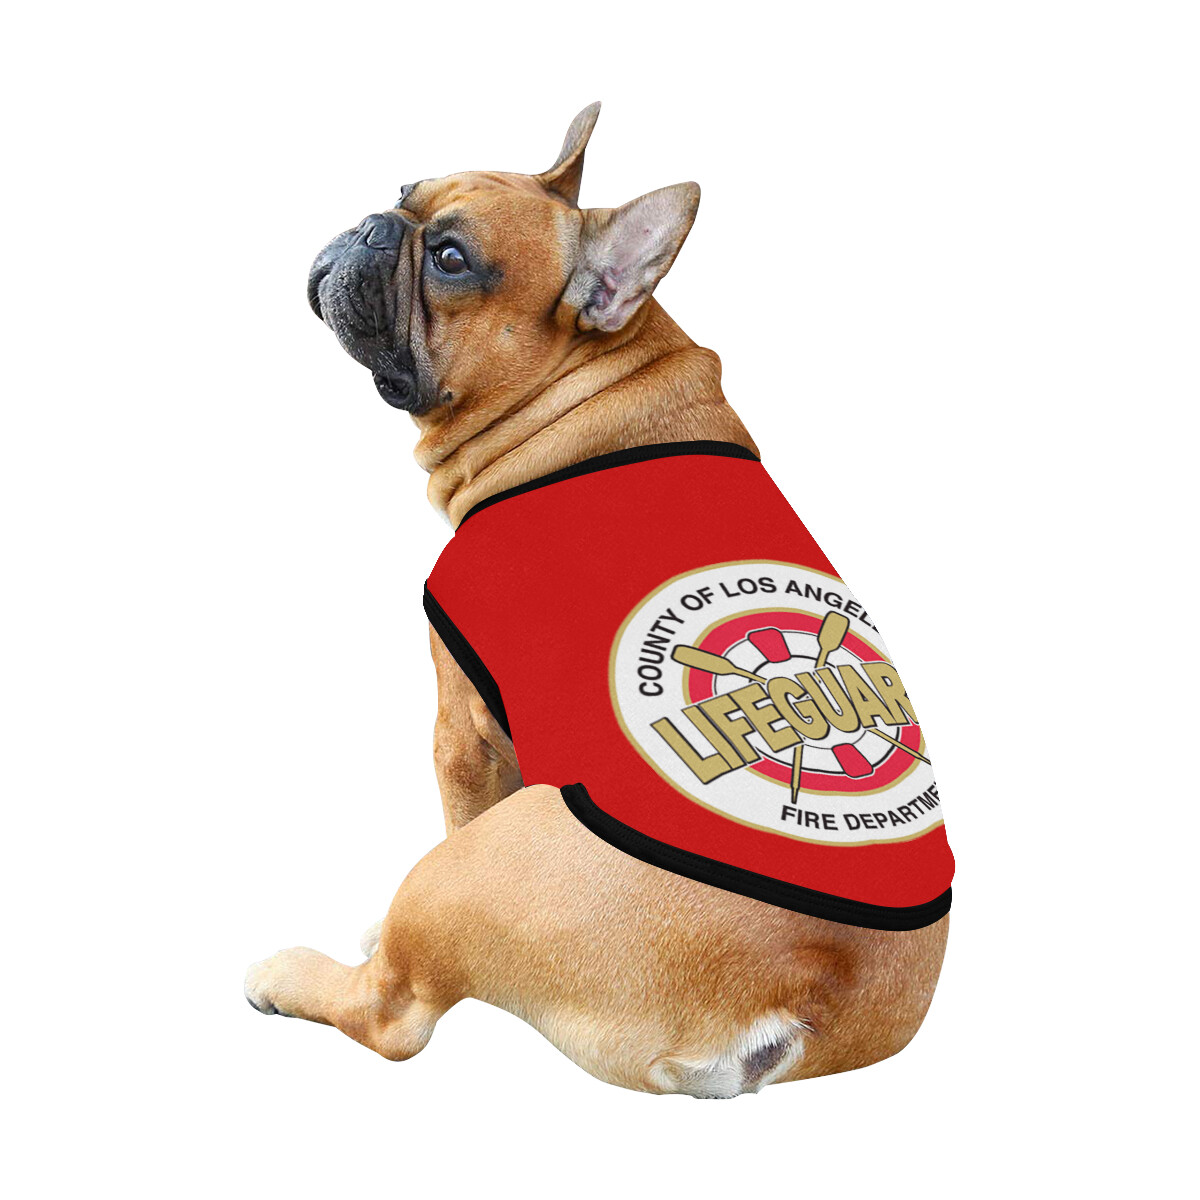 🐕 Lifeguard LAFD Los Angeles Fire Department Dog shirt, Dog Tank Top, Dog t-shirt, Dog clothes, Gifts, 7 sizes XS to 3XL, dog gifts